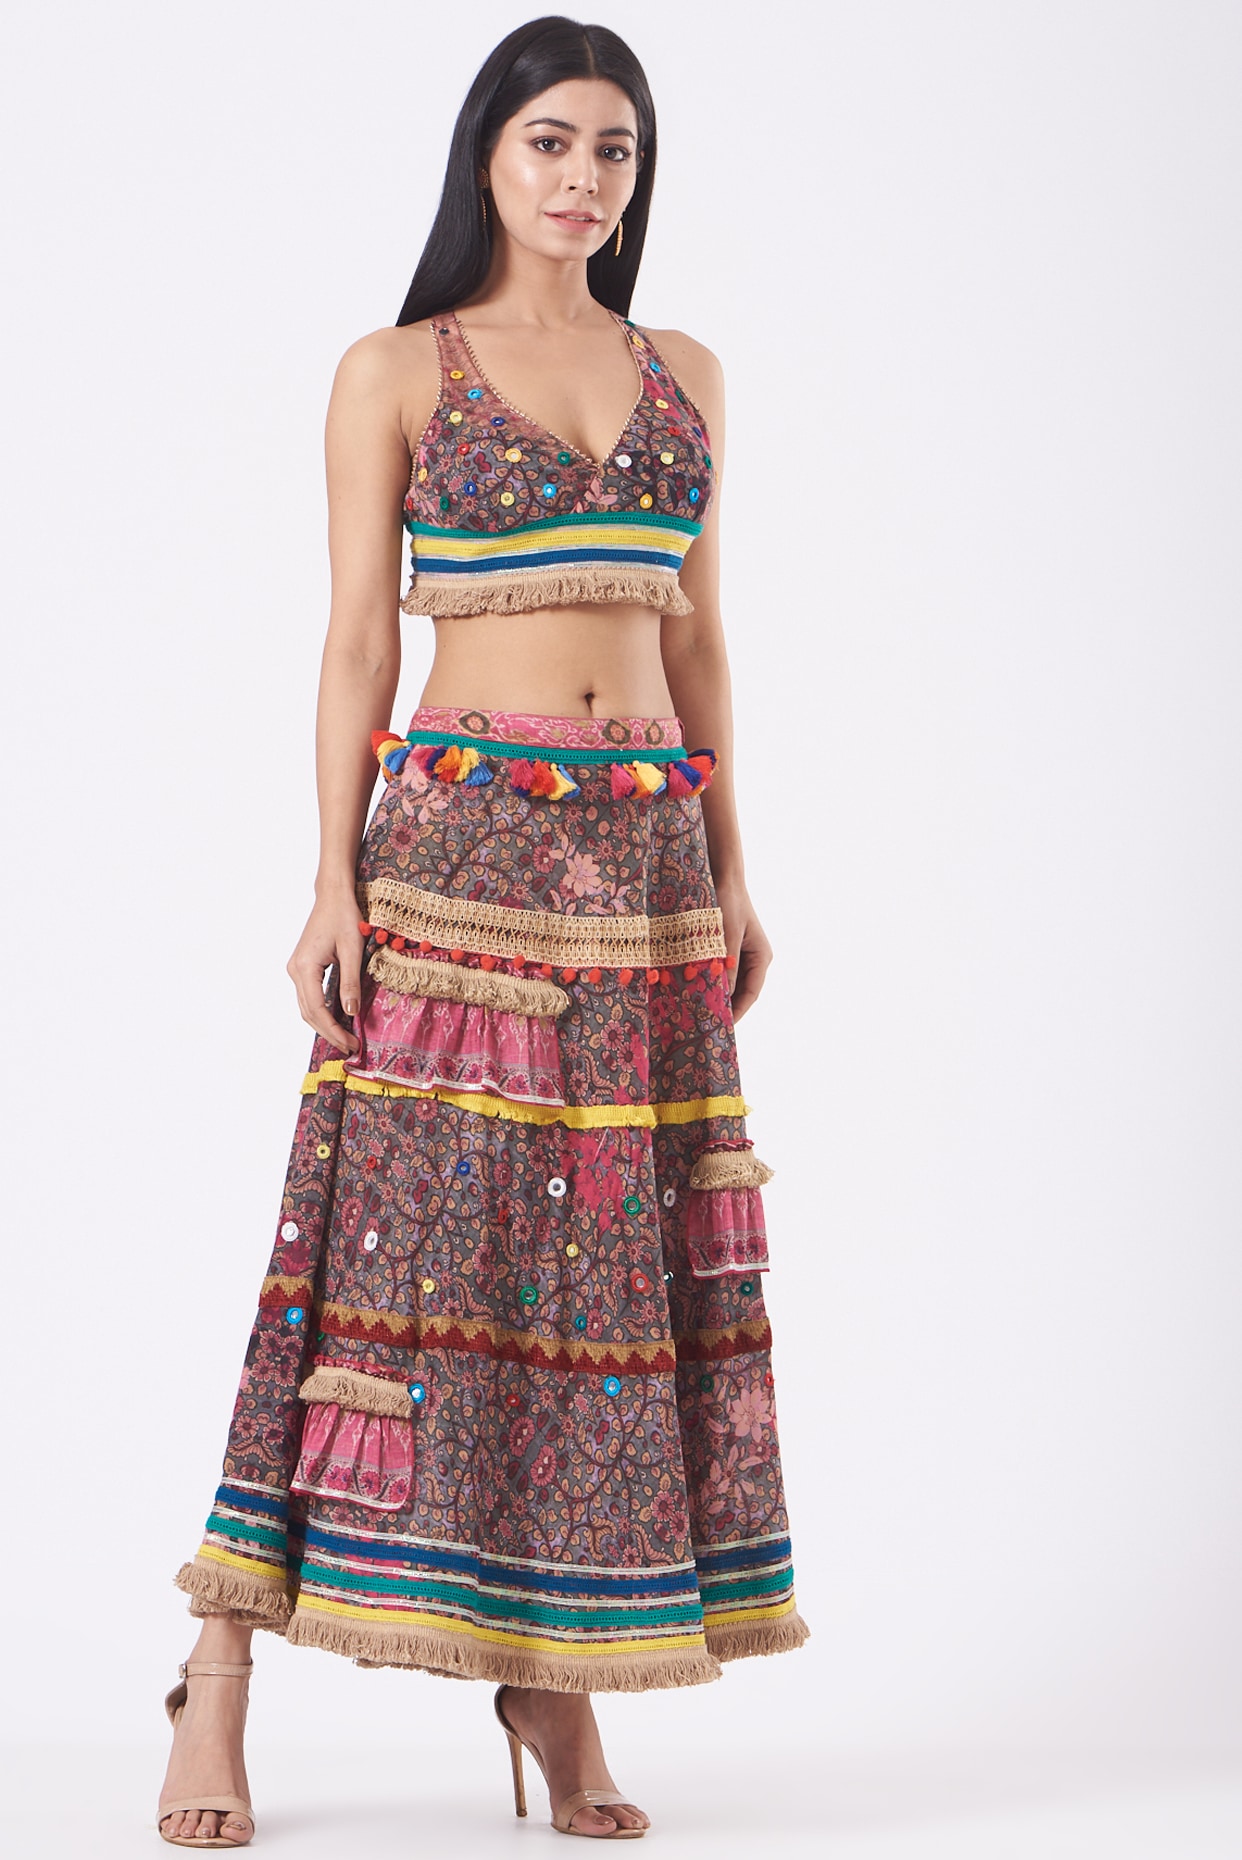 fcity.in - Lehenga Designs For Women Long Skirts For Wholesale Party Wear